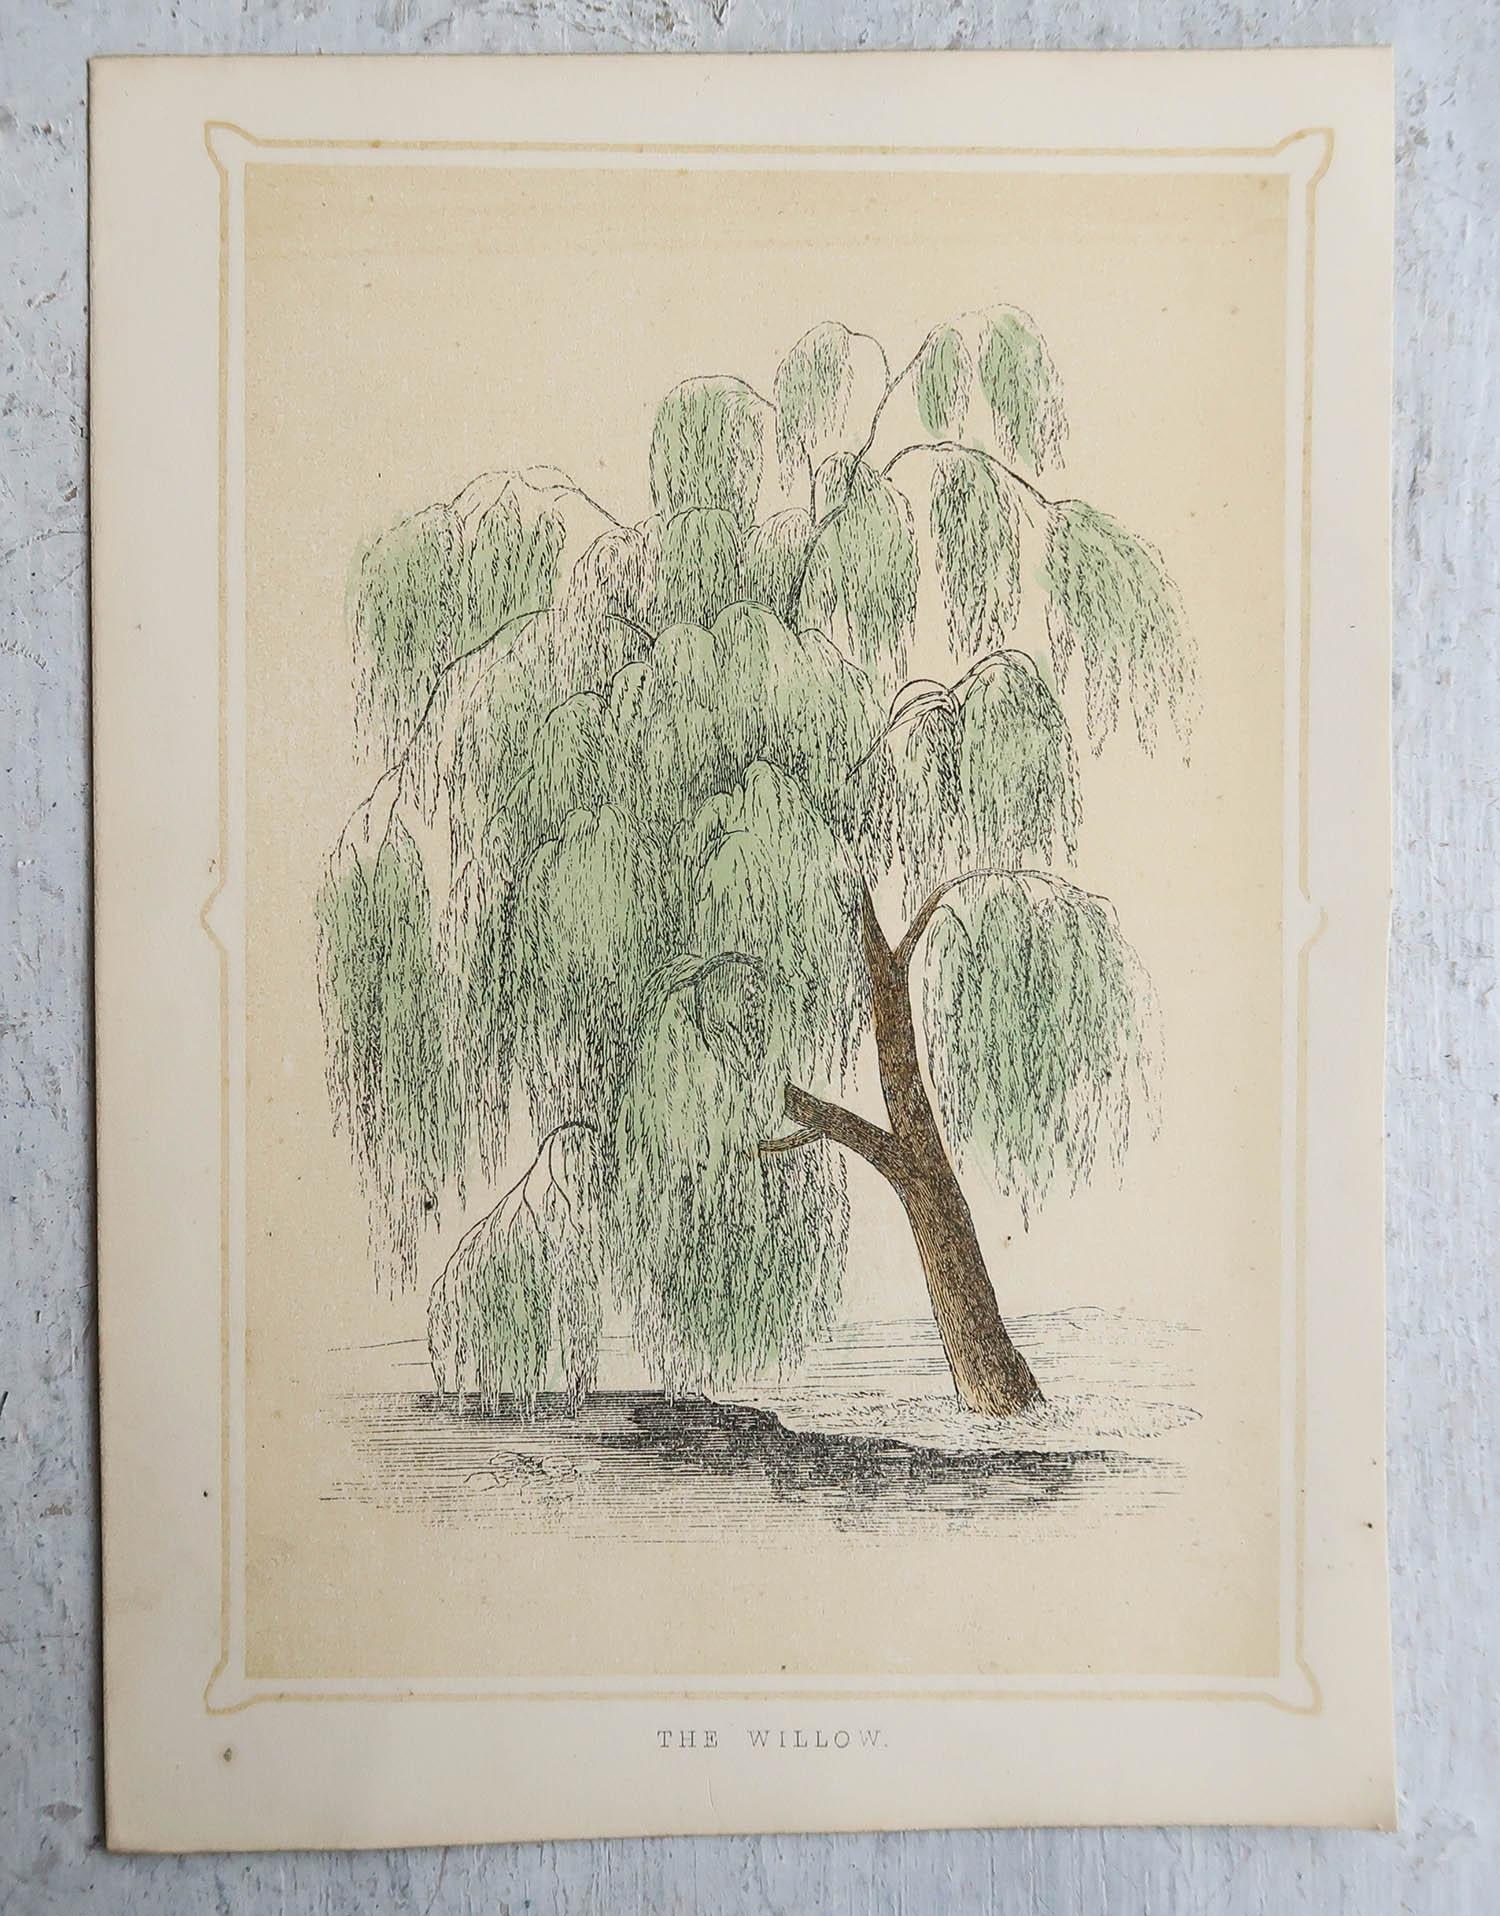 Wonderful set of 12 trees prints

Lithographs

Original colour

Published, circa 1850

Unframed.

The measurement given is for one print.

